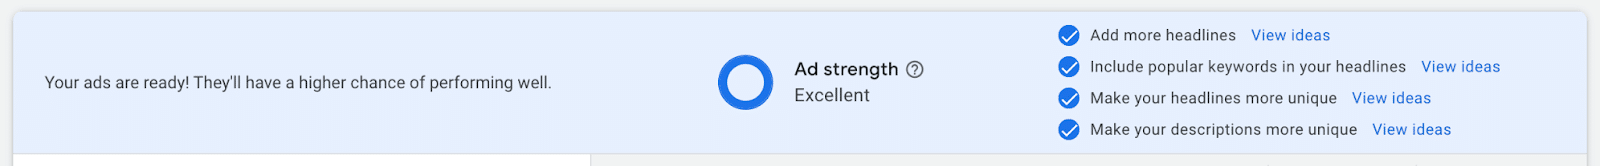  When creating or editing a RSA, an Ad strength score will show at the top of the box